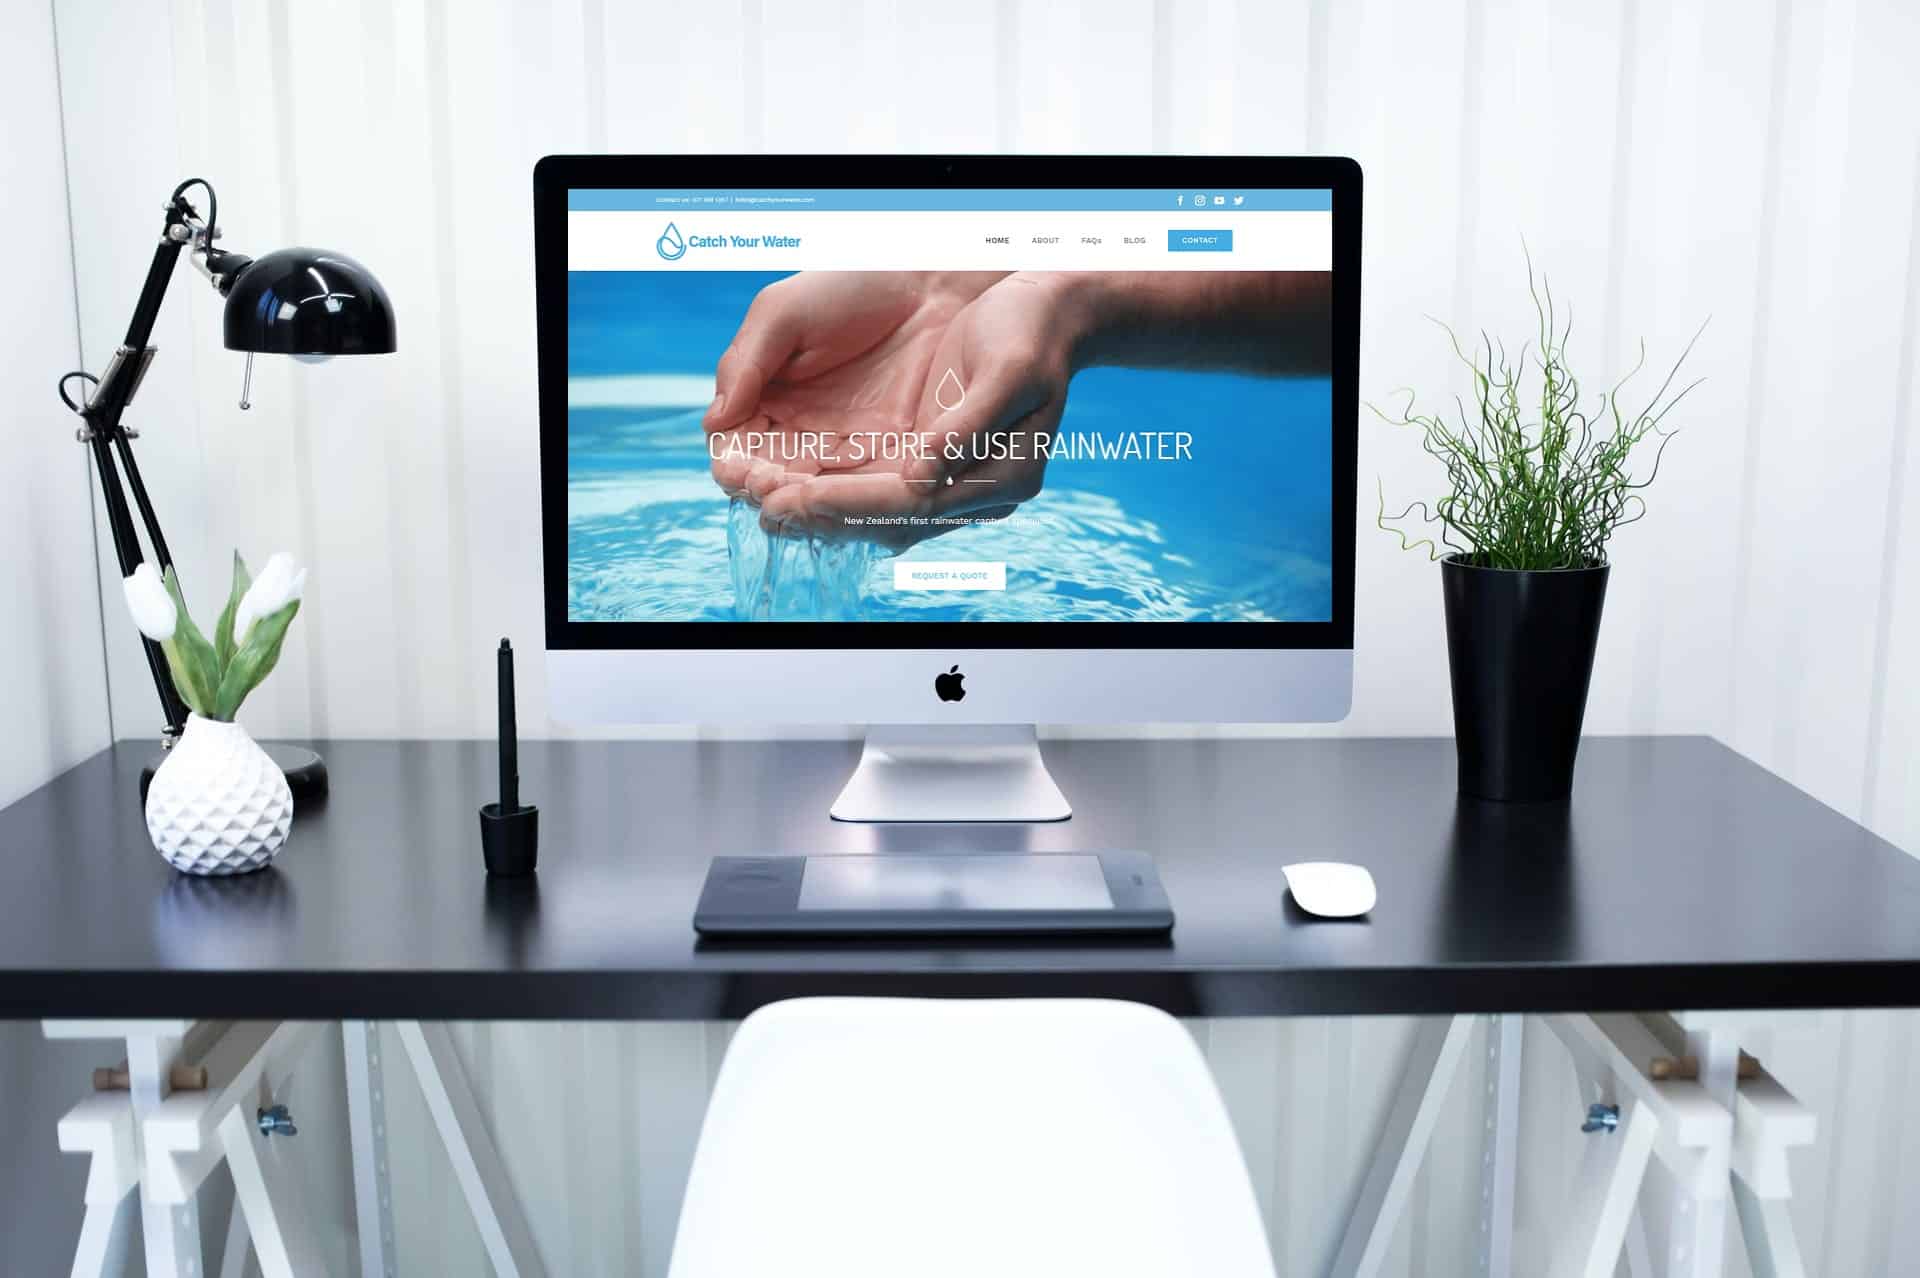 catch your water siri the agency web design